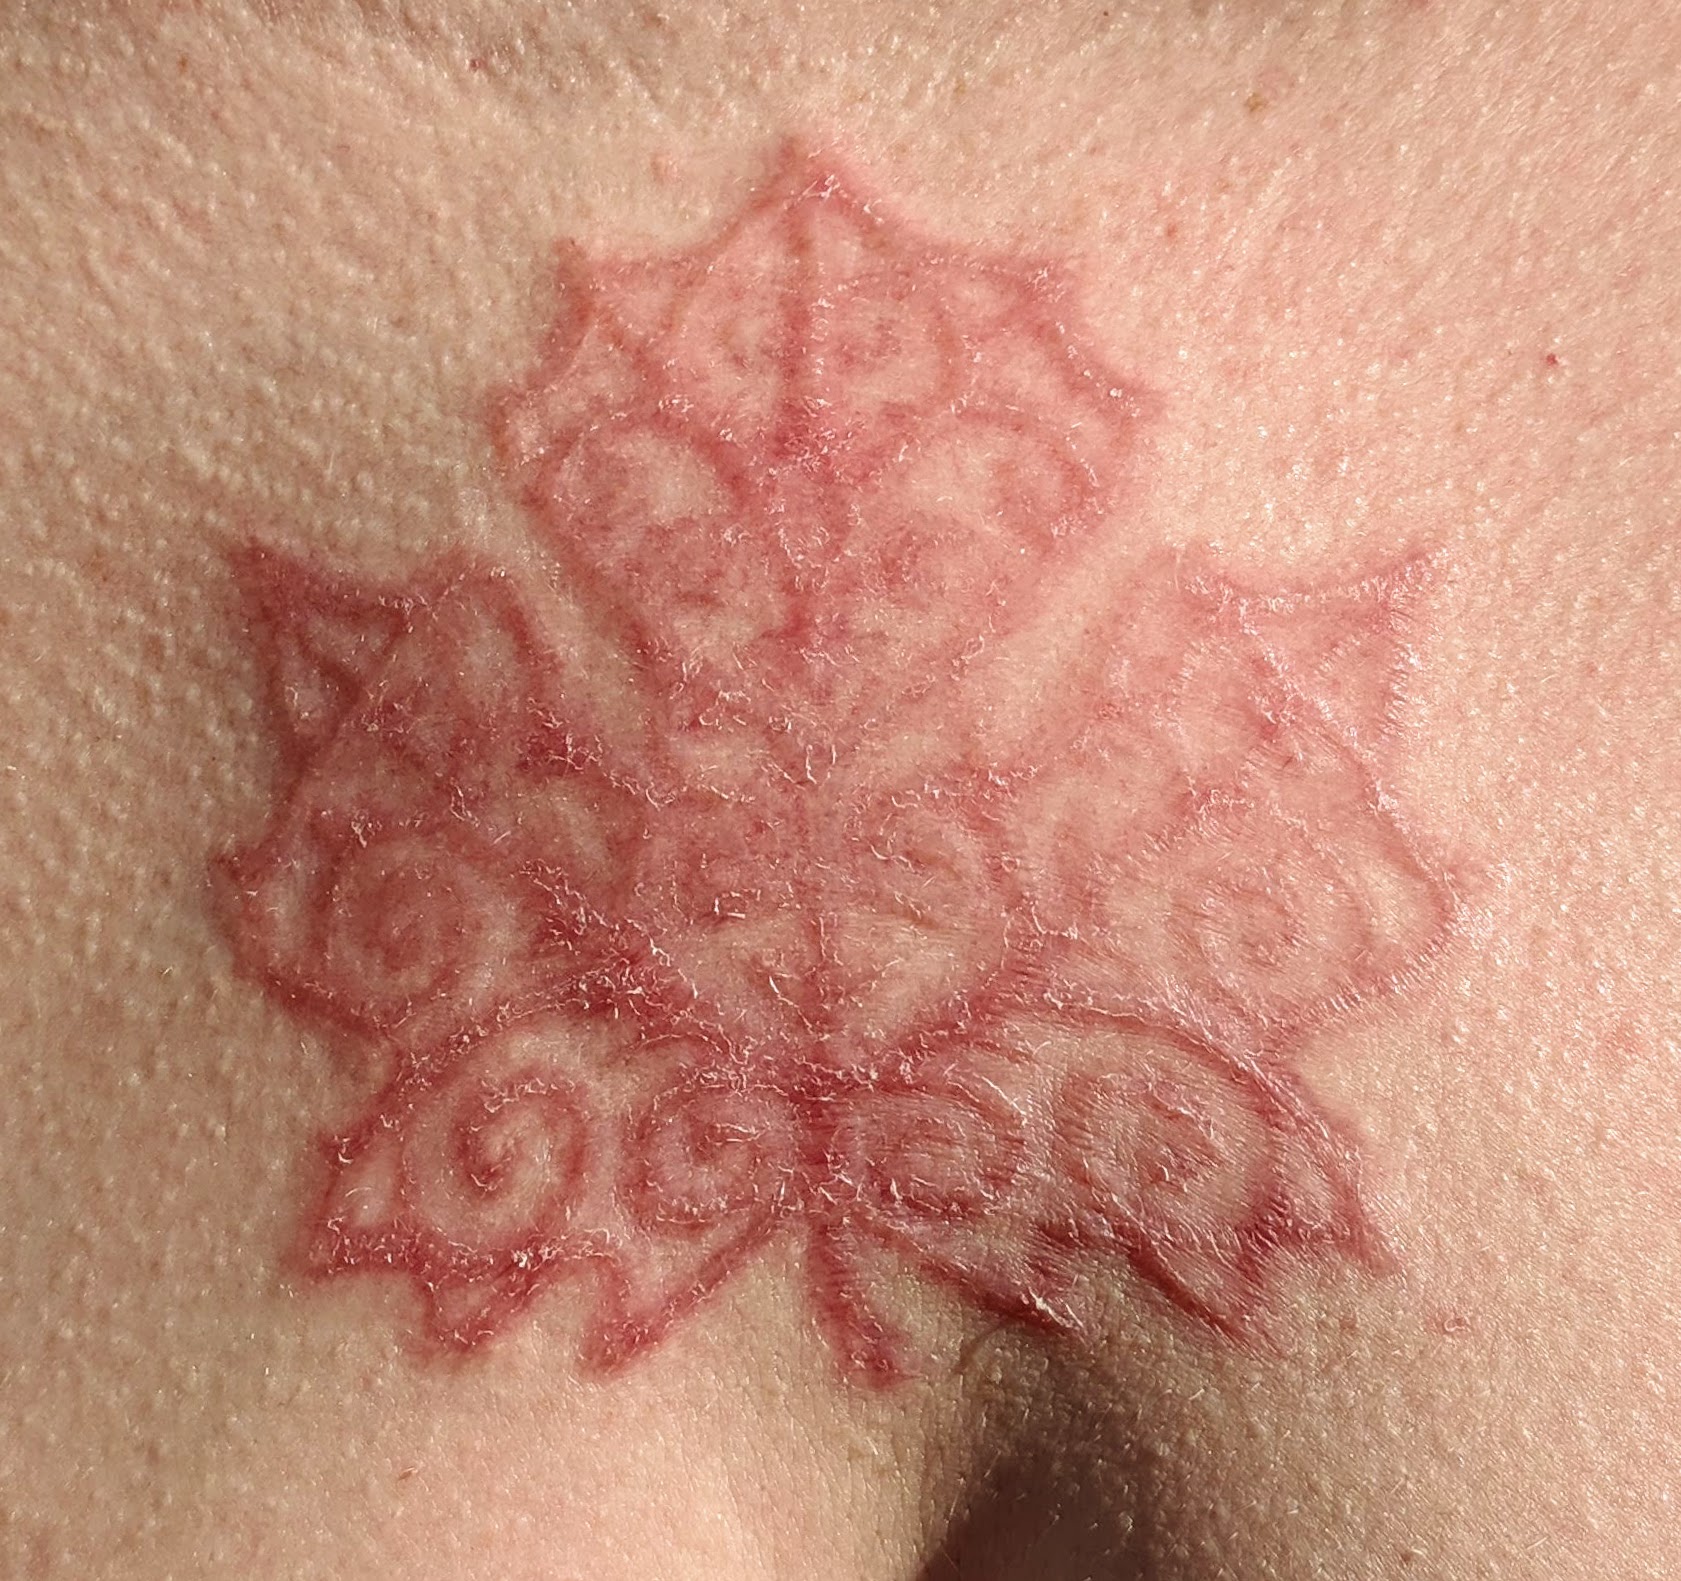 Maple leaf just shy of 3 weeks into healing